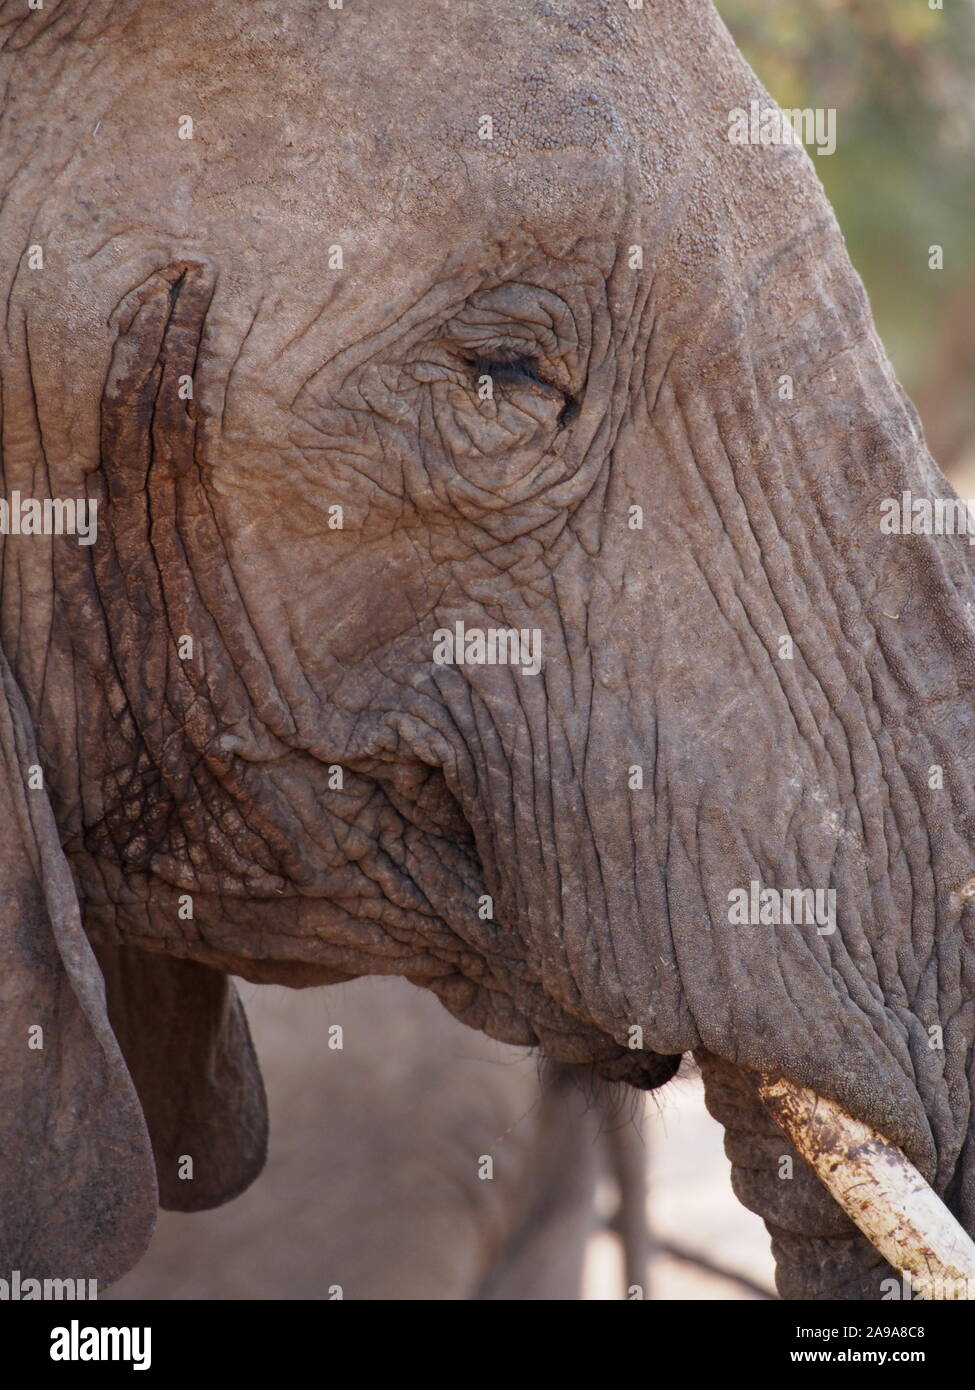 Doro !Nawas Namibia close zoom of adult desert elephants head shows eye, mouth, tusk and edge of ears in great detail Stock Photo